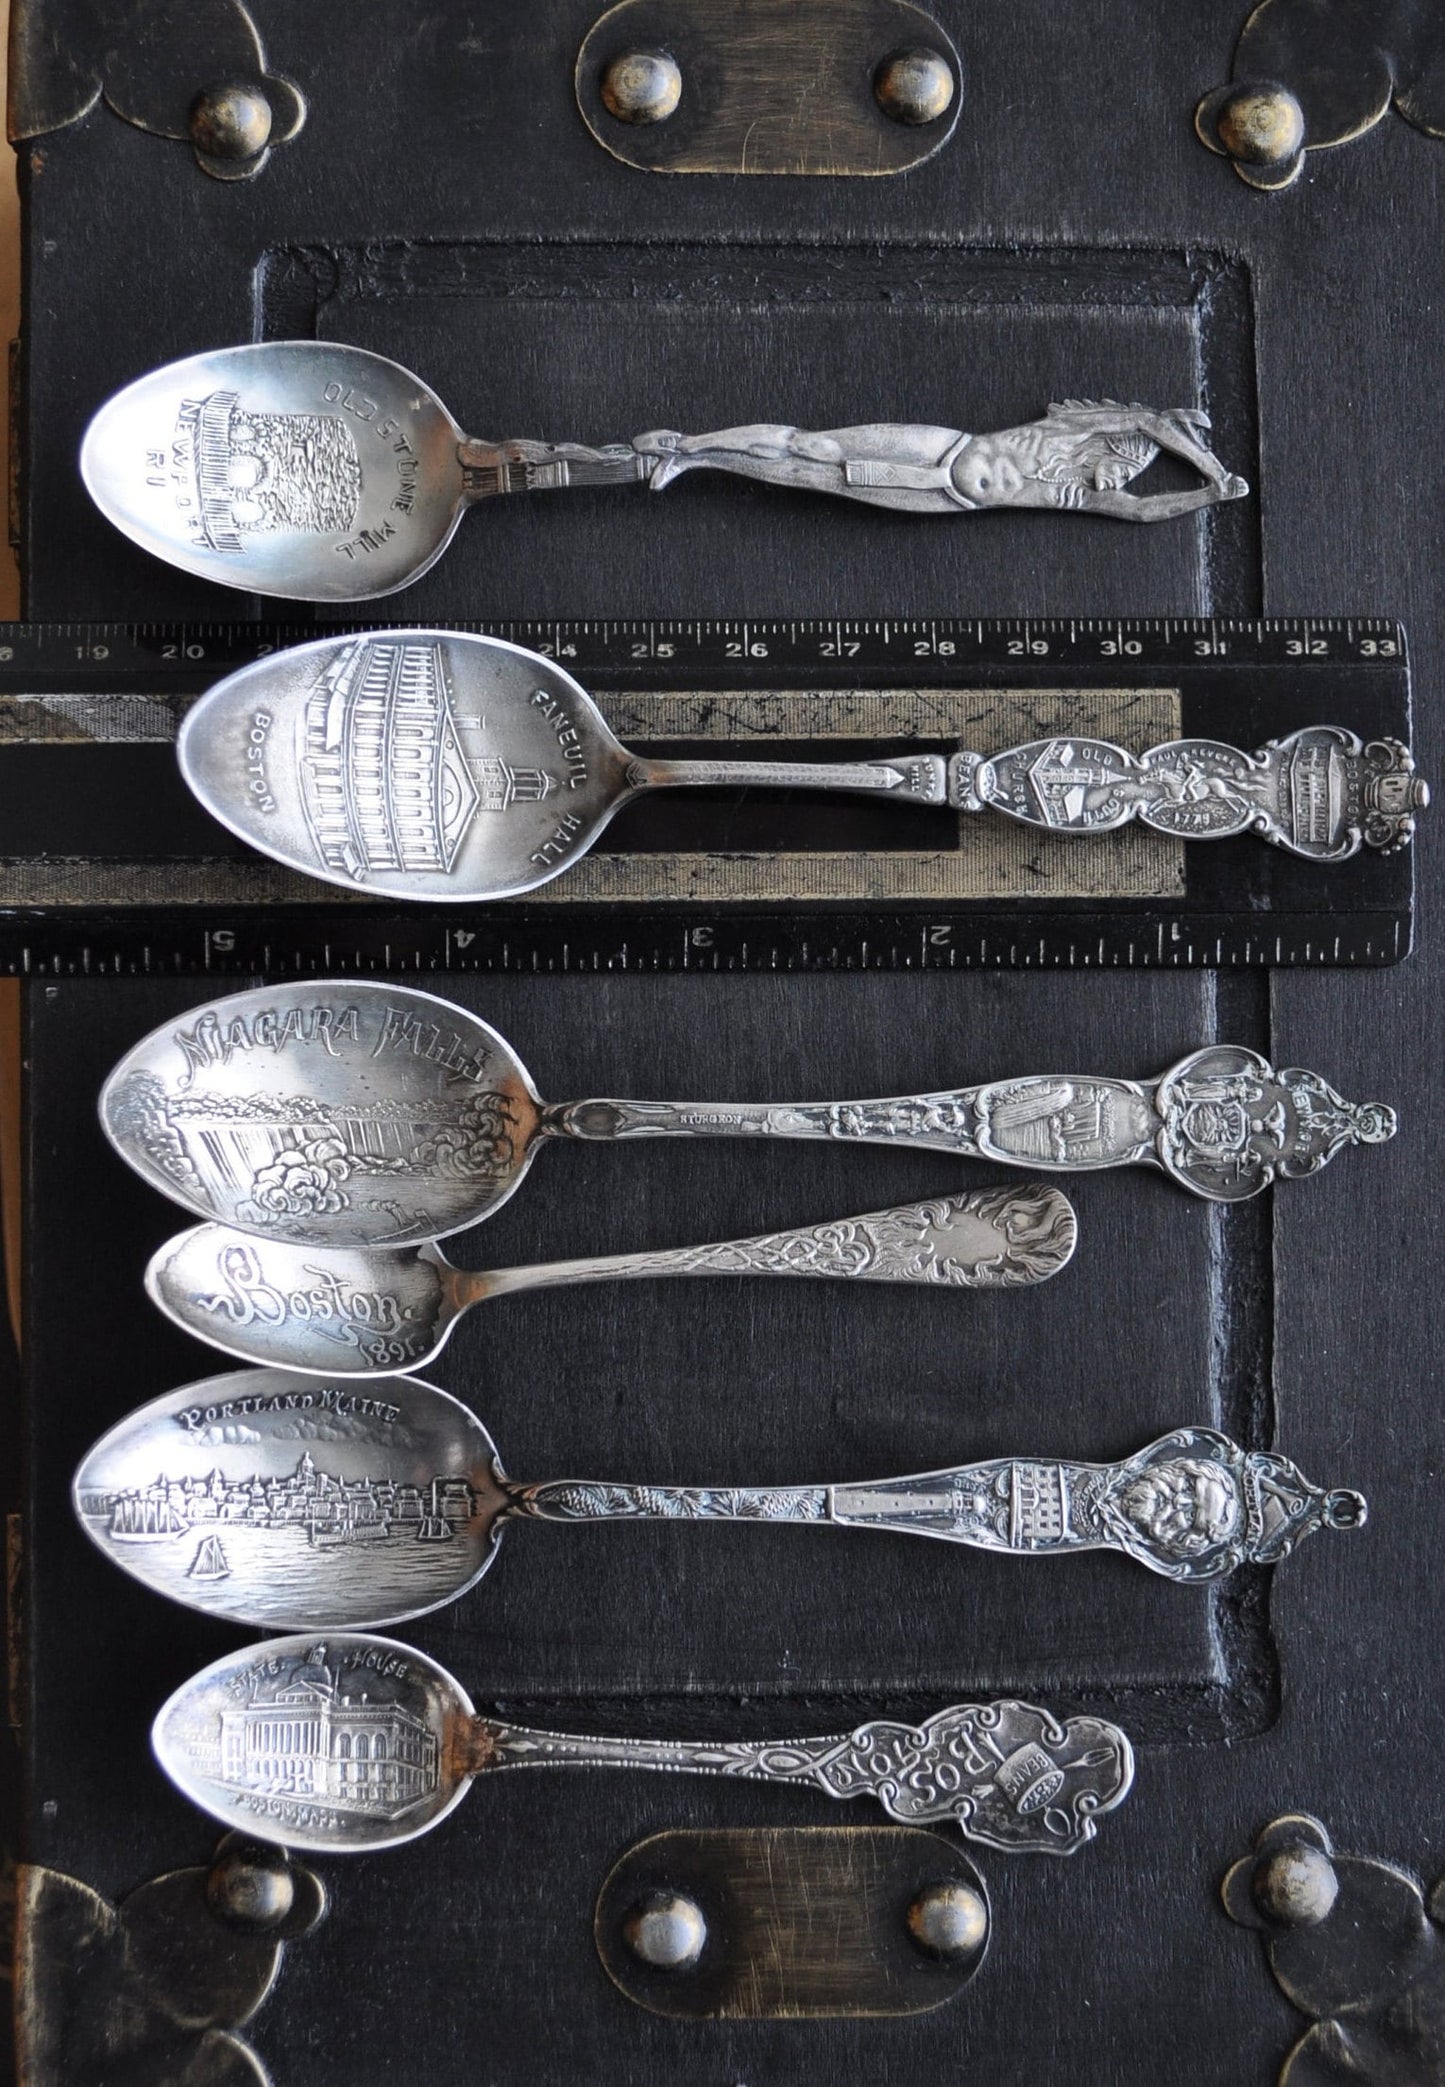 Set of 6 Antique New England Sterling Souvenir Spoons, Large Sizes, Awesome for Décor & Collections, Silver Spoons Souvenir Spoons Sterling